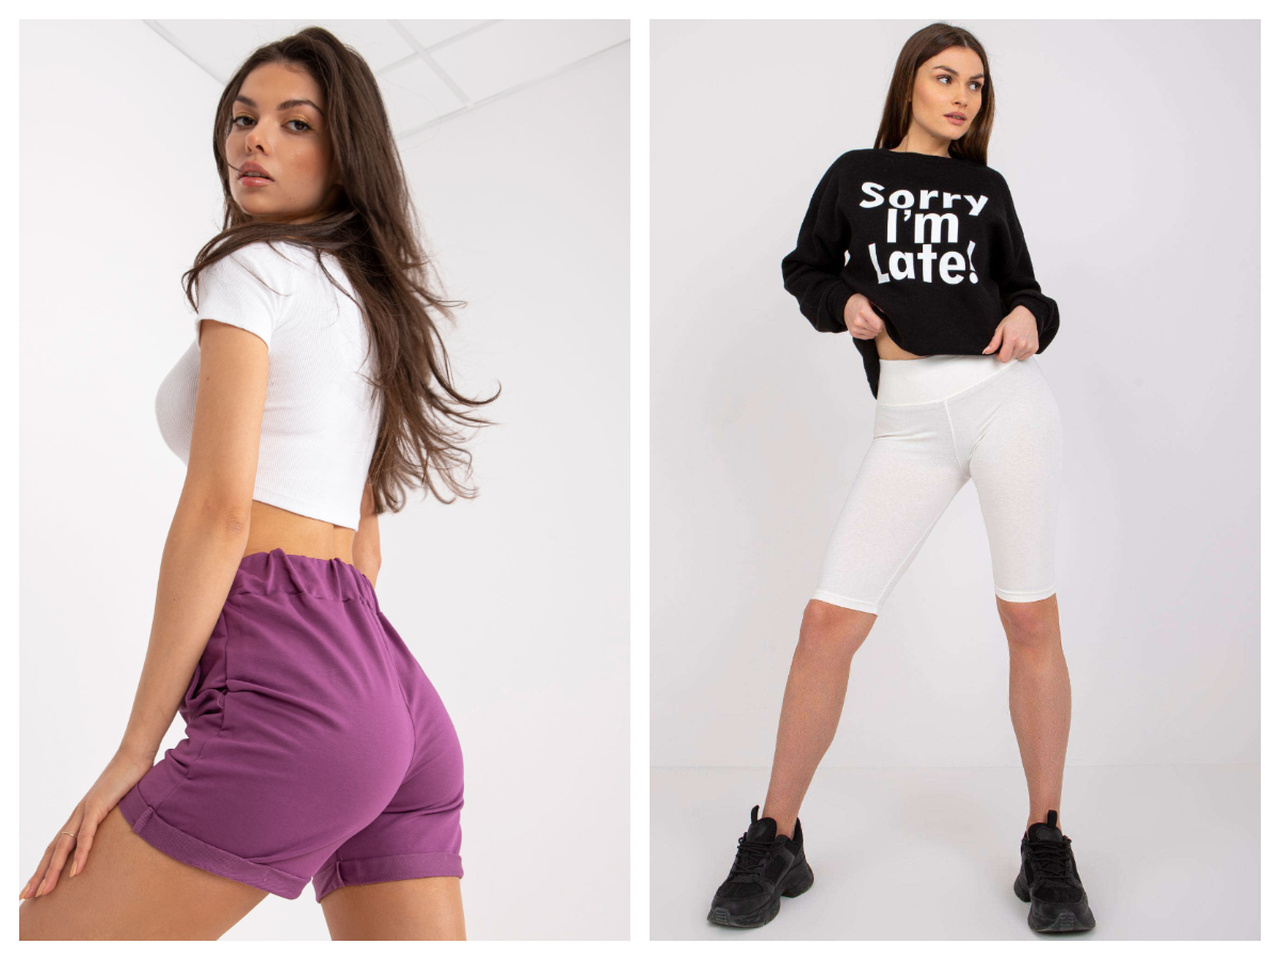 Universal shorts basic – the key to comfort and style